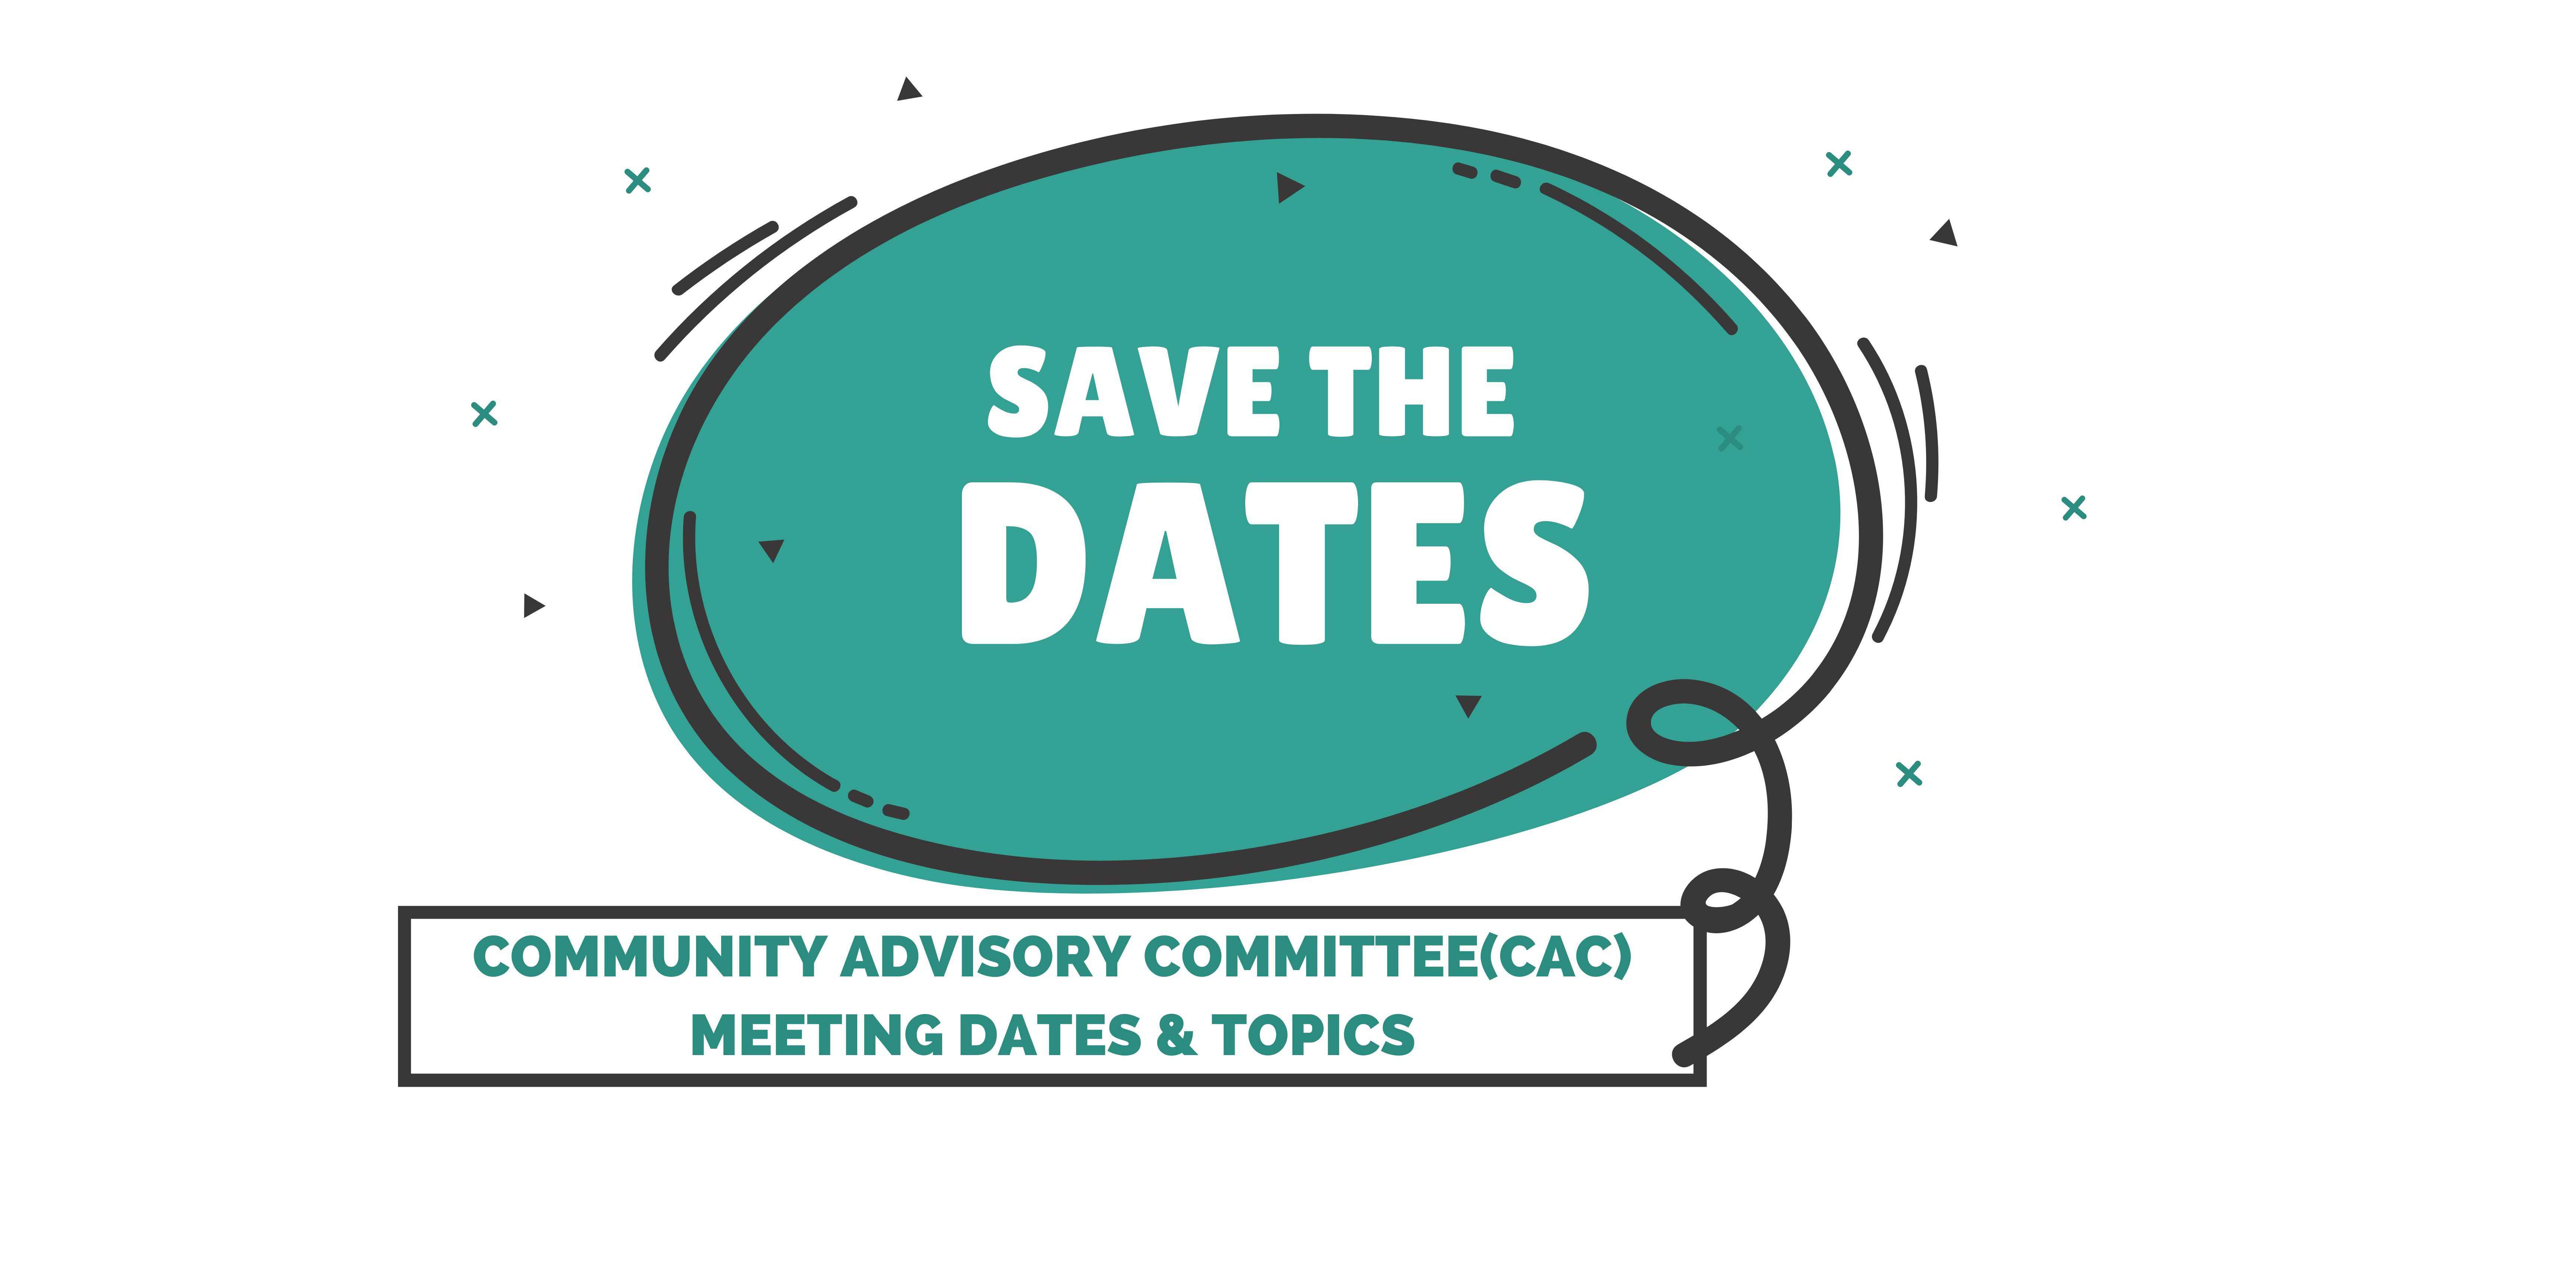 Community Advisory Committee (CAC) Save the Dates